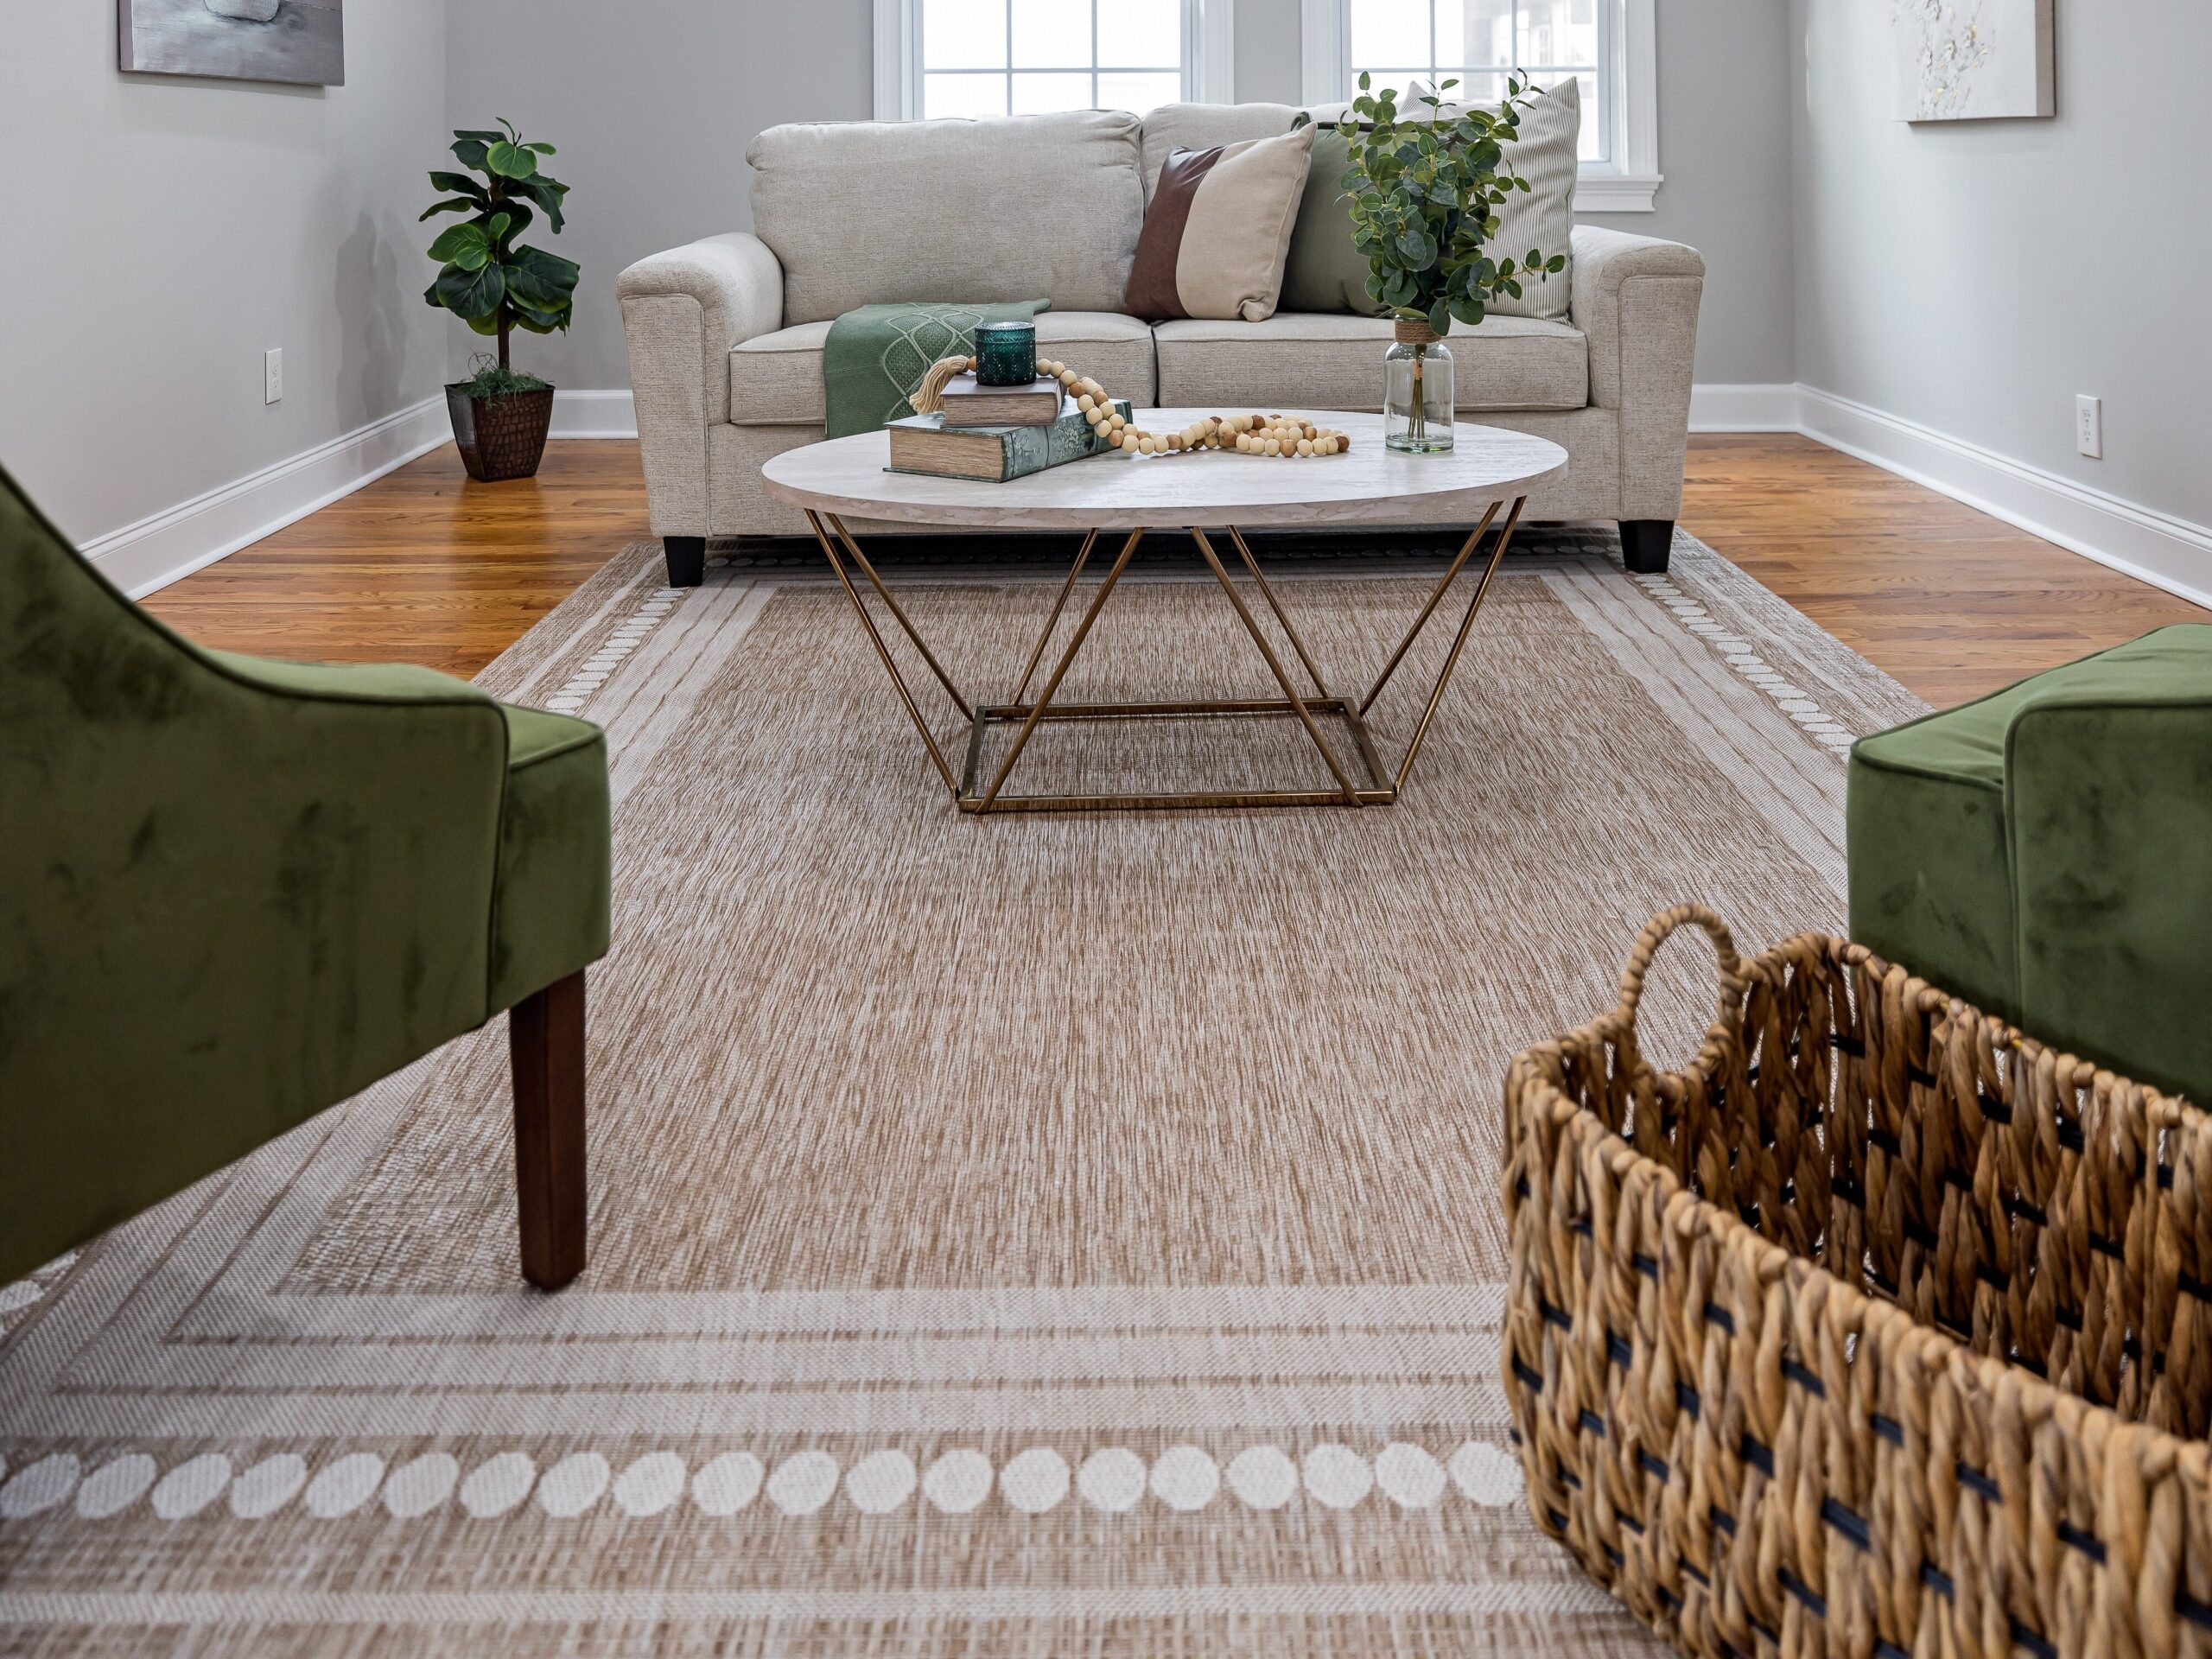 Among the most popular items in the top ten rug trends list, neutral rugs work with all furnishing styles and colors.